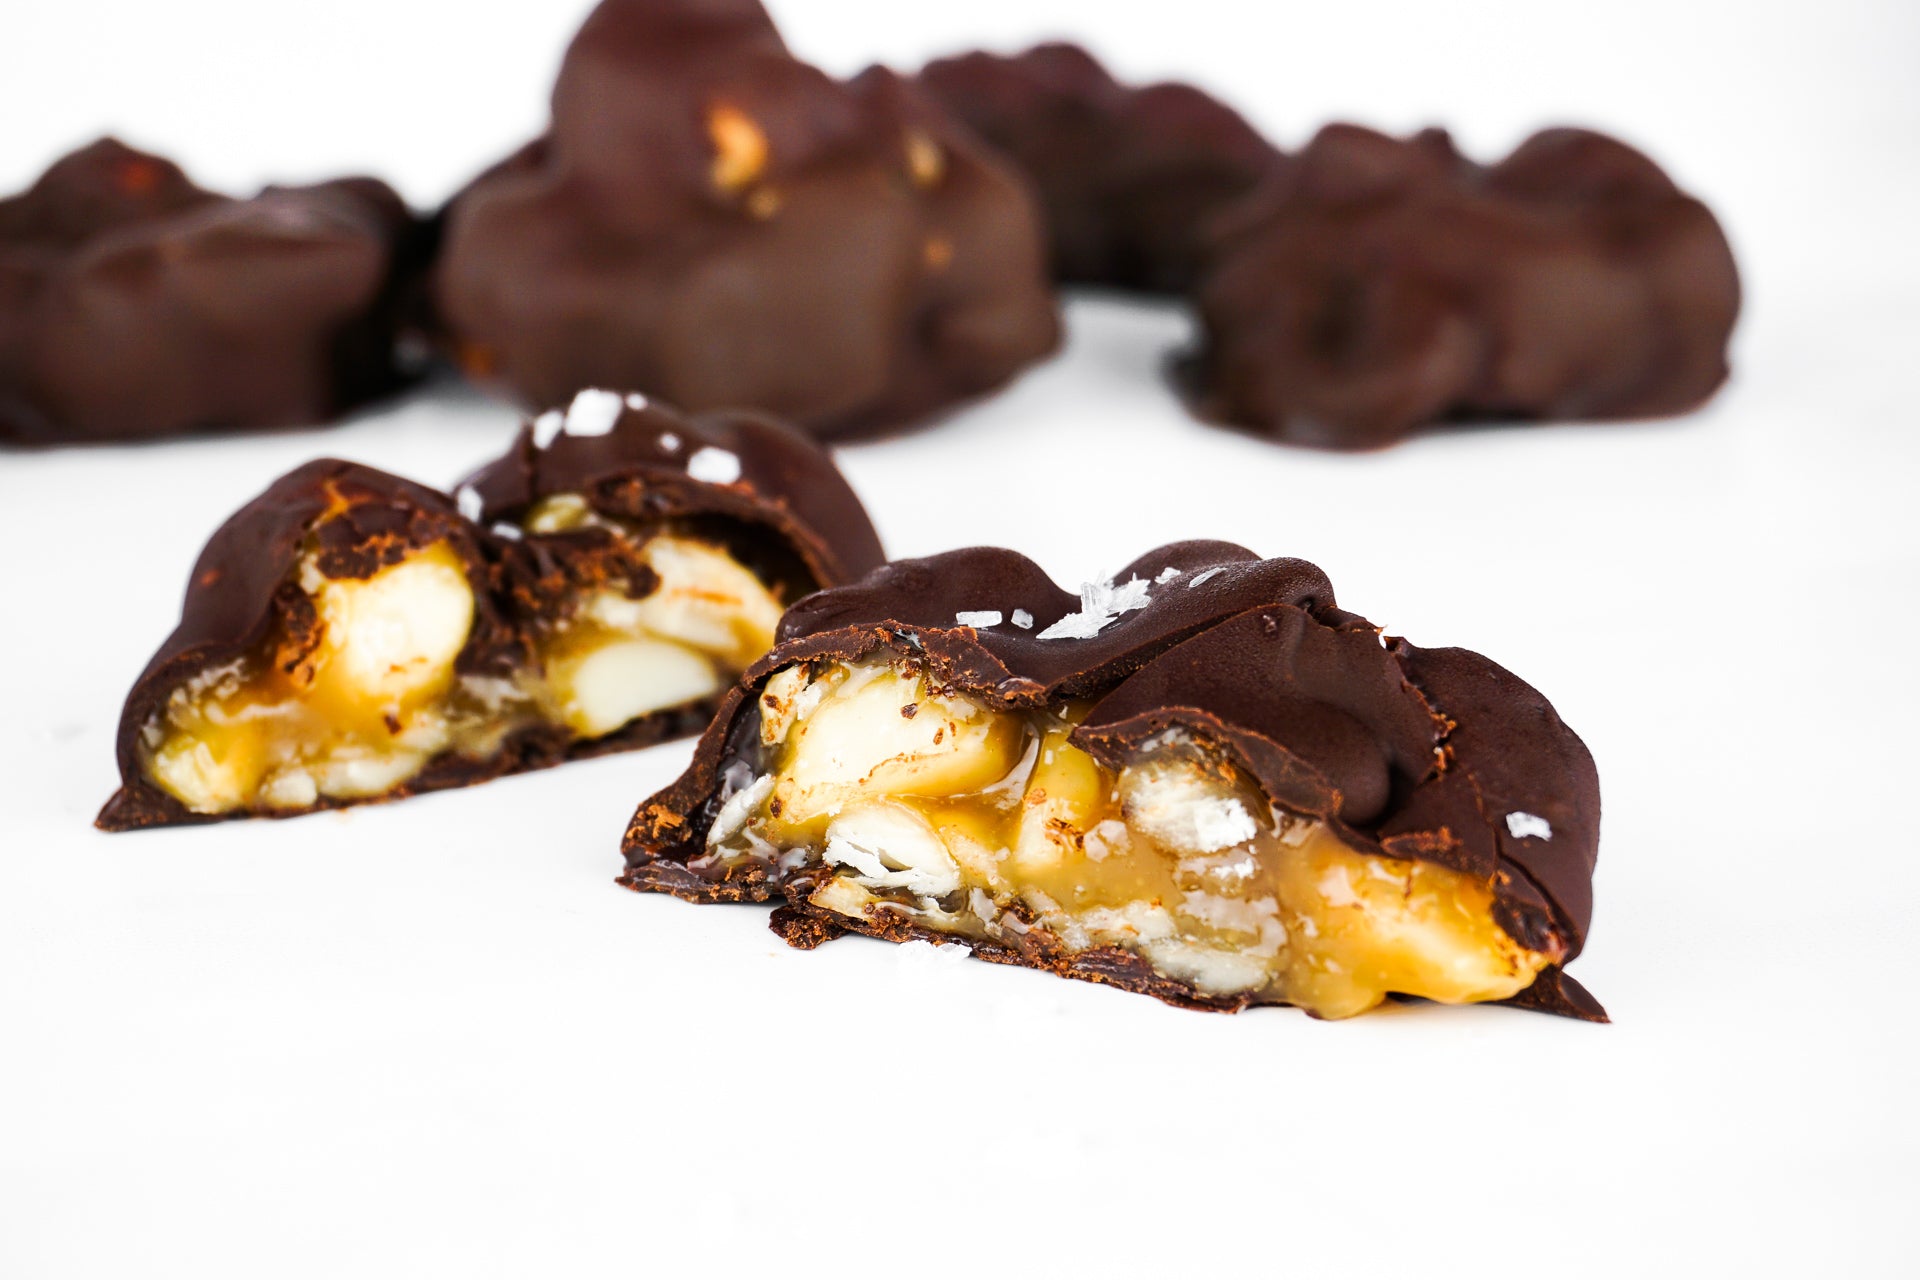 Sticky Caramel and Macadamia Clusters